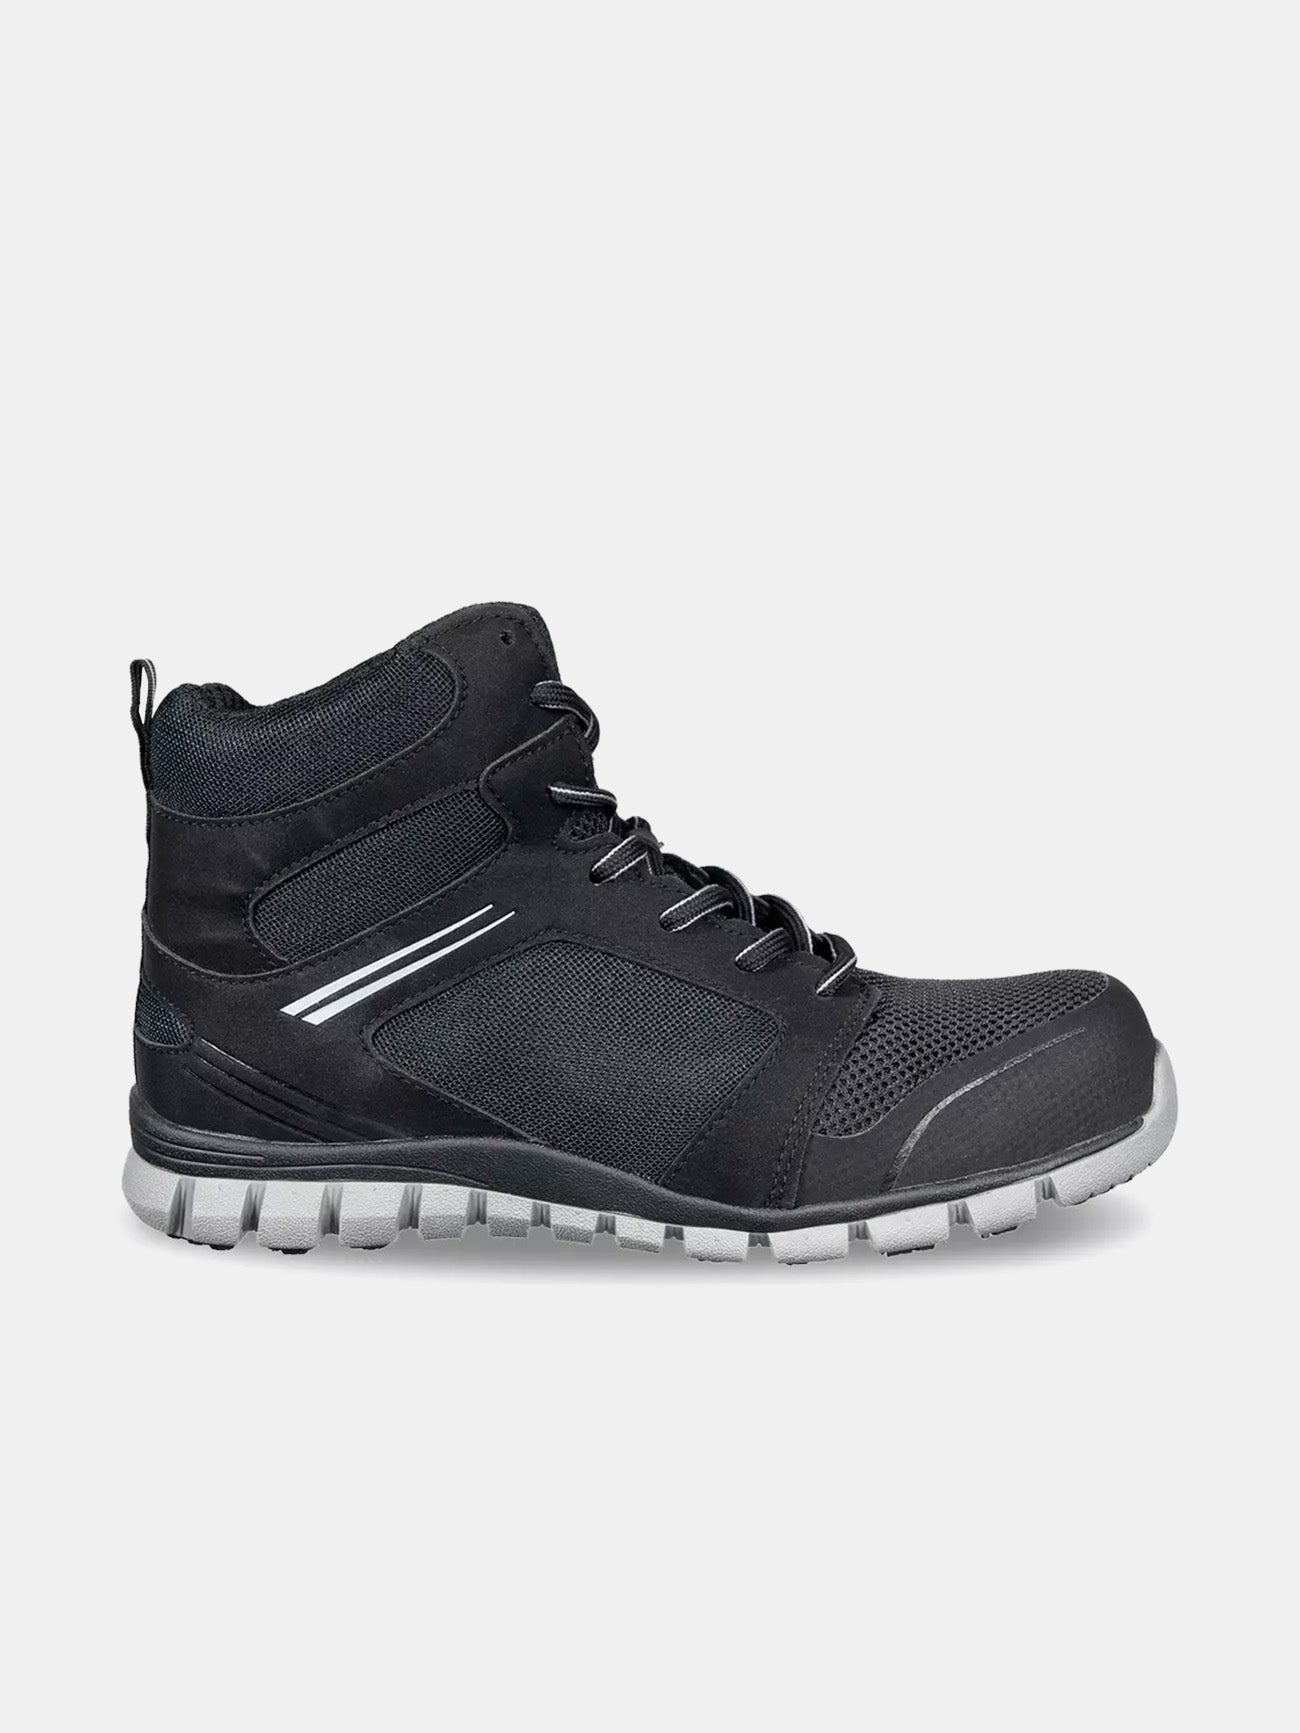 Safety Jogger Men's Absolute Safety Boots